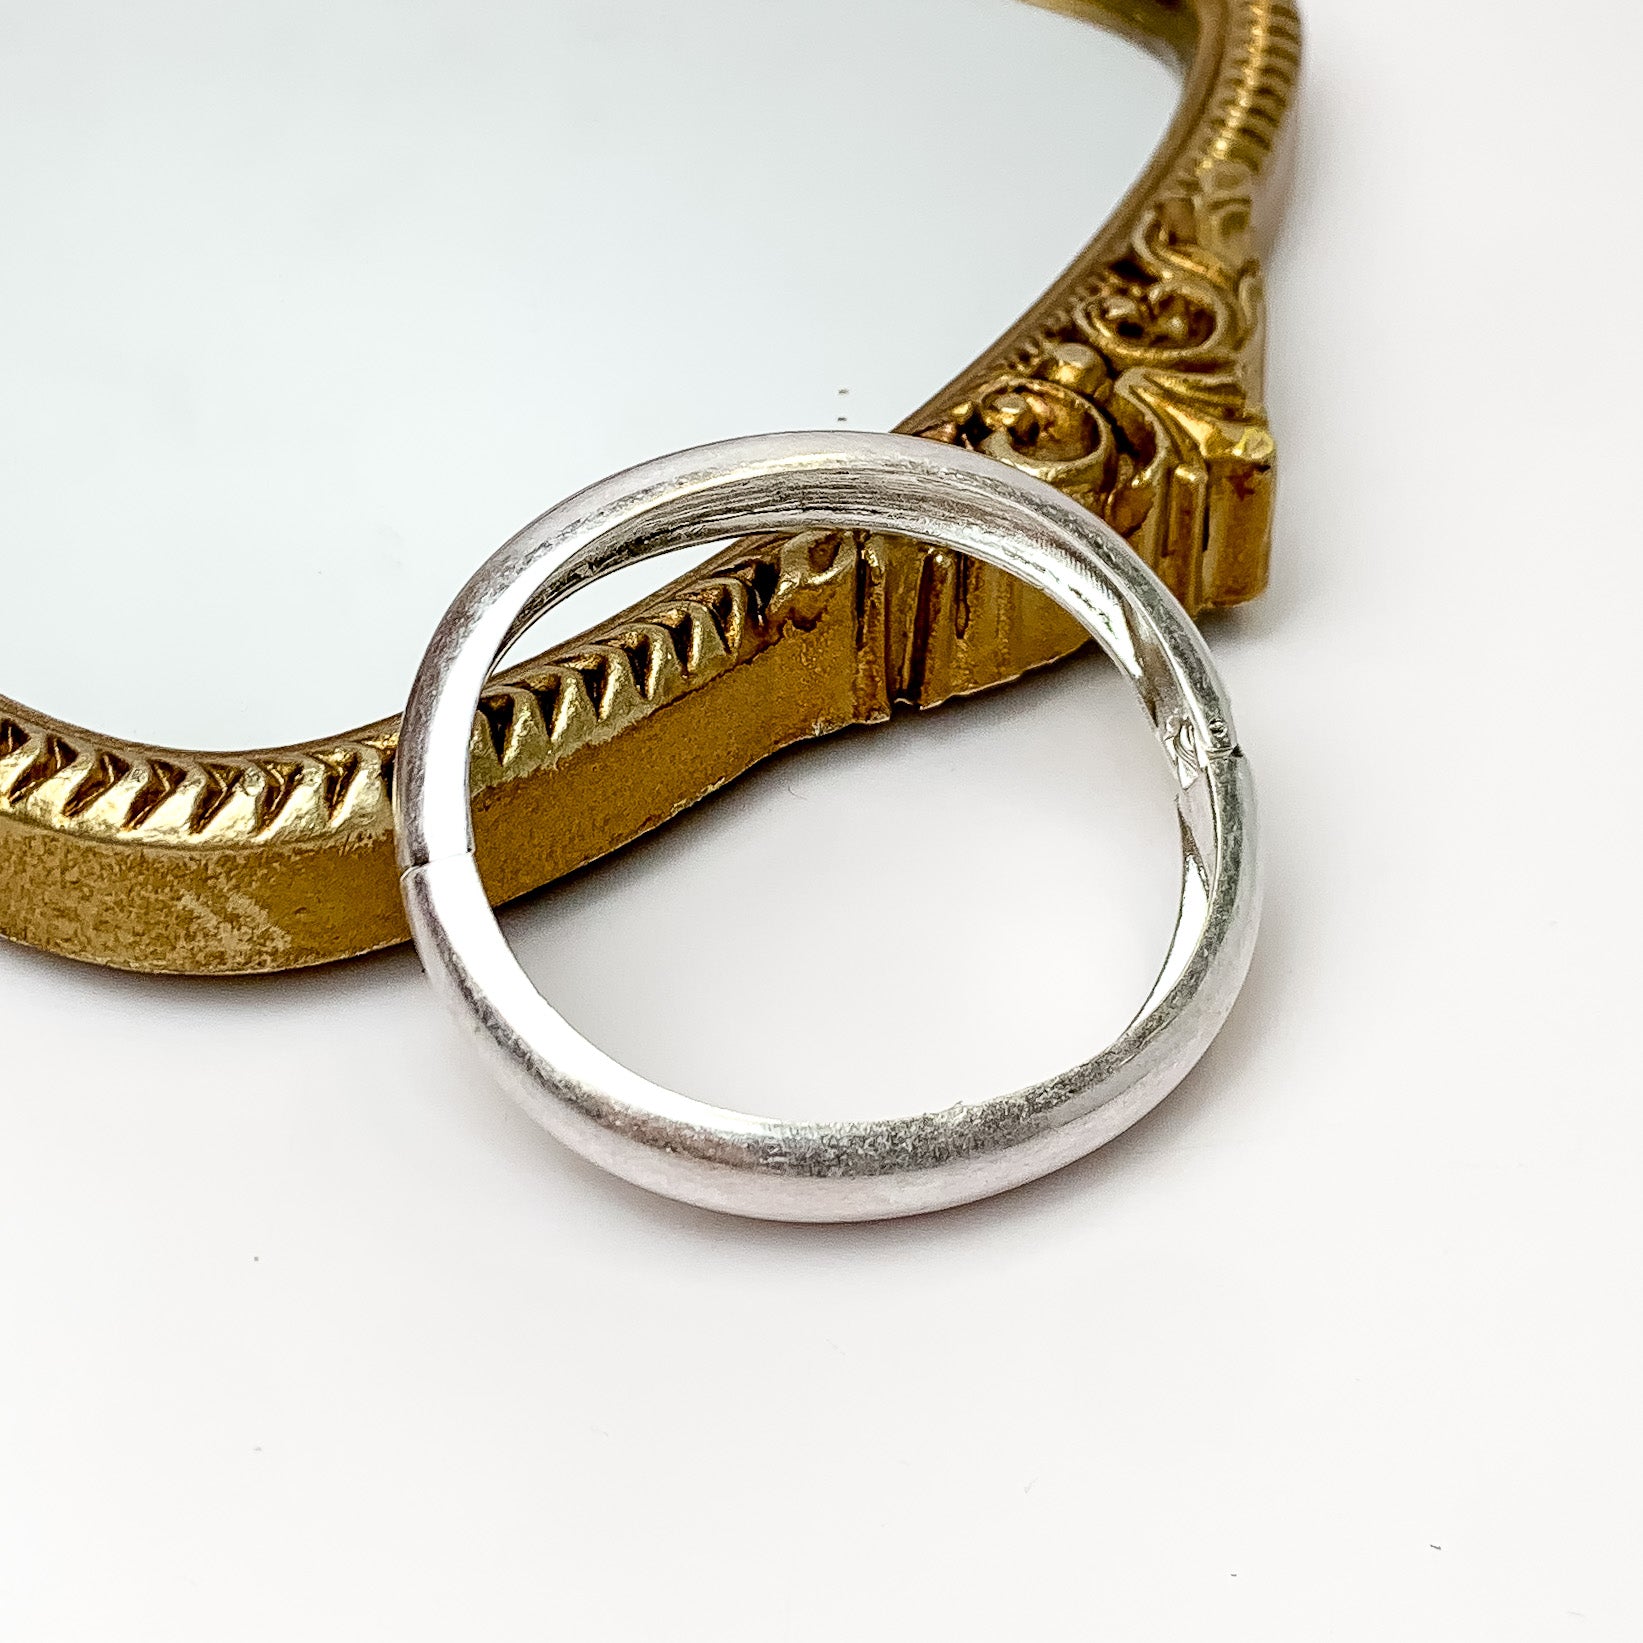 Coastal Chic Silver Tone Magnetic Bracelet. Pictured on a white background with the bracelet leaning against a gold frame mirror.